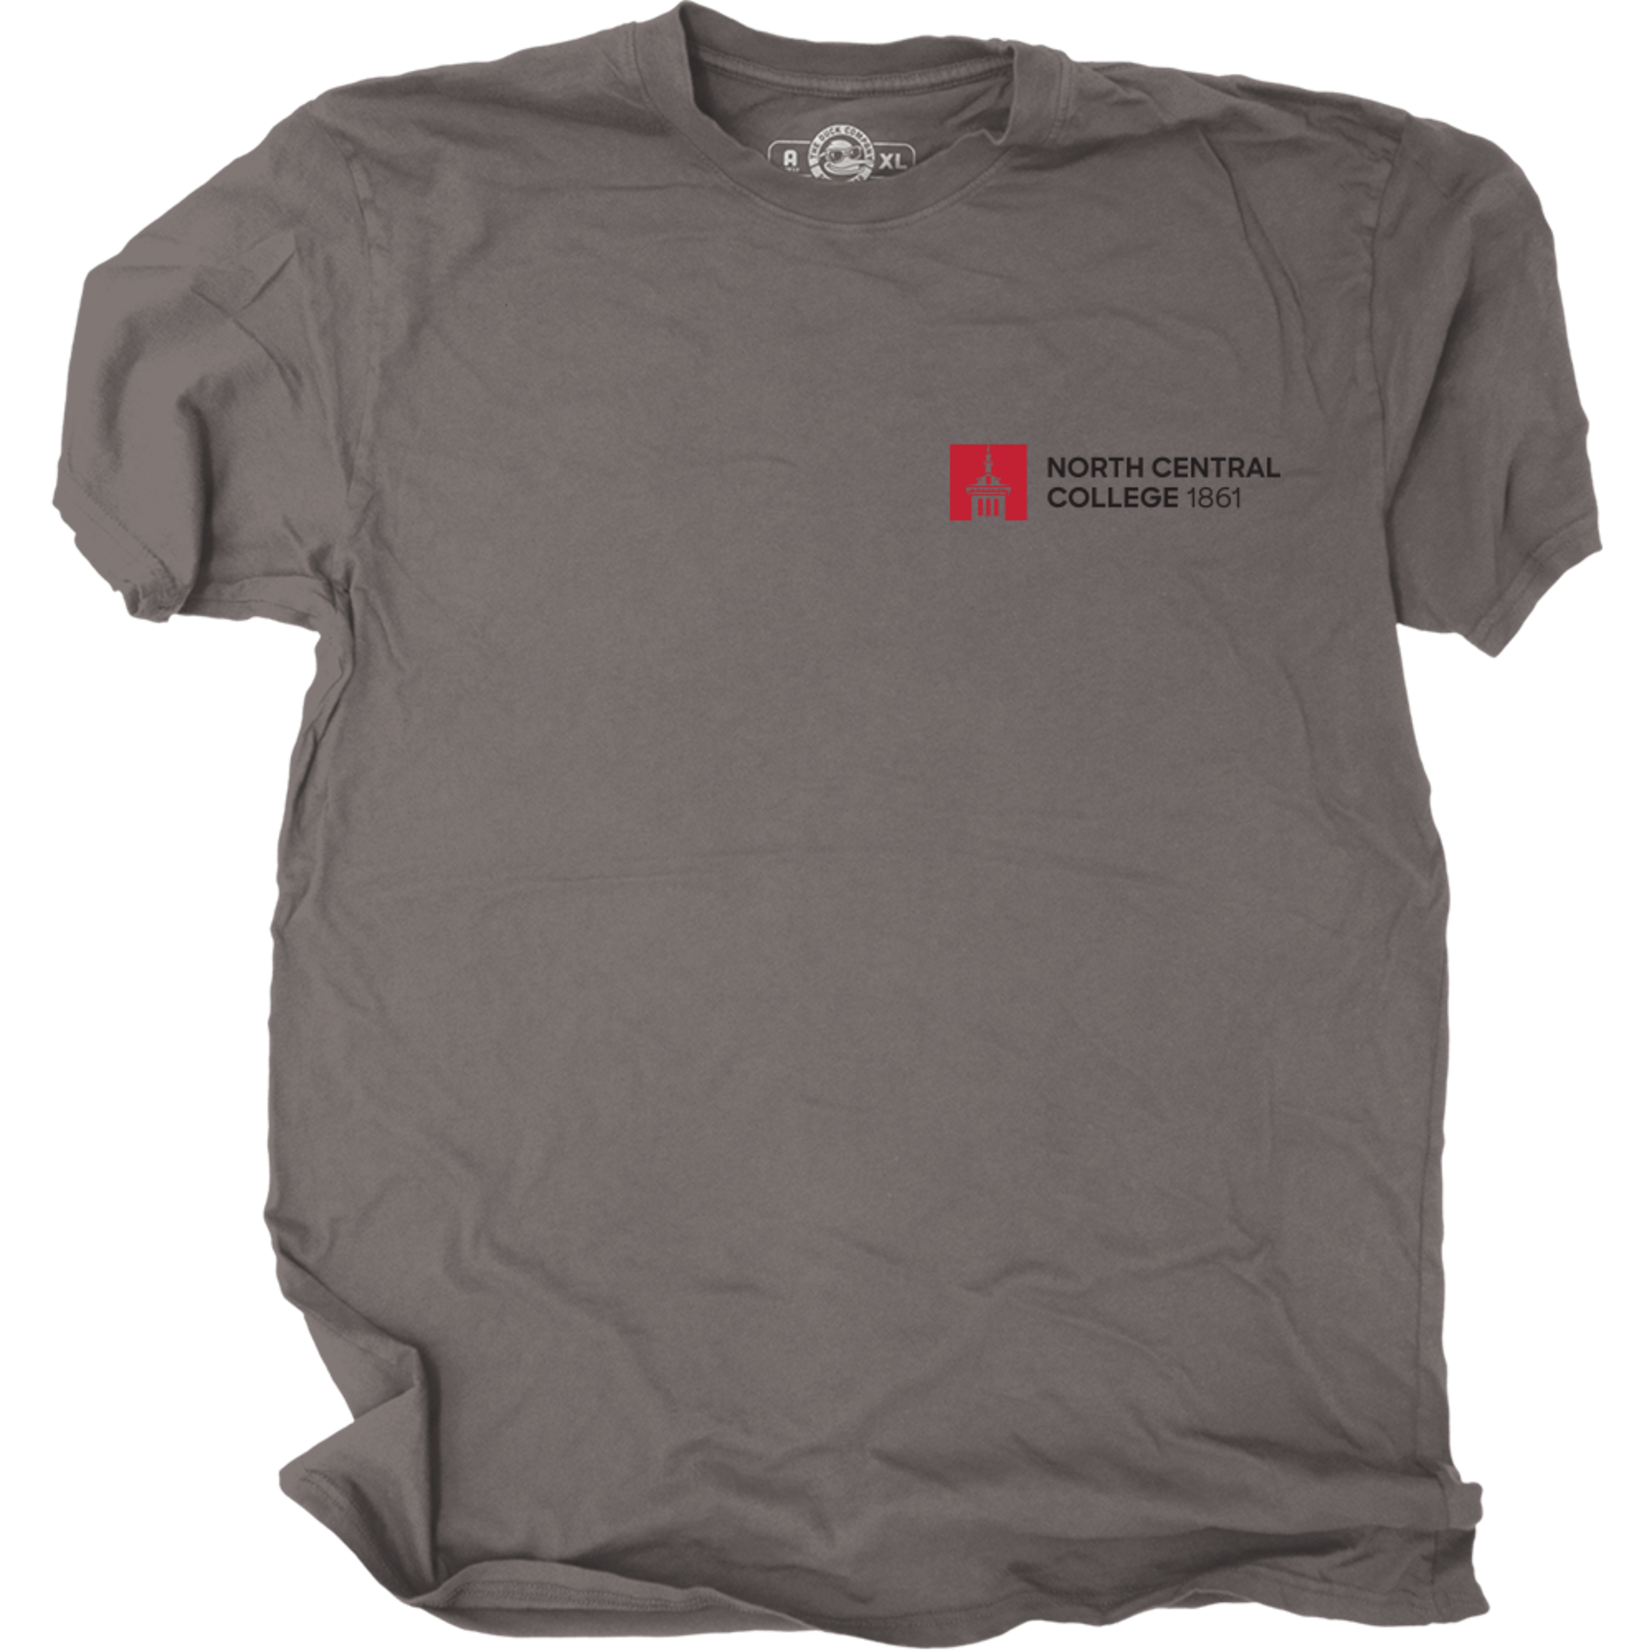 Duck Company North Central College Backdrop Tee